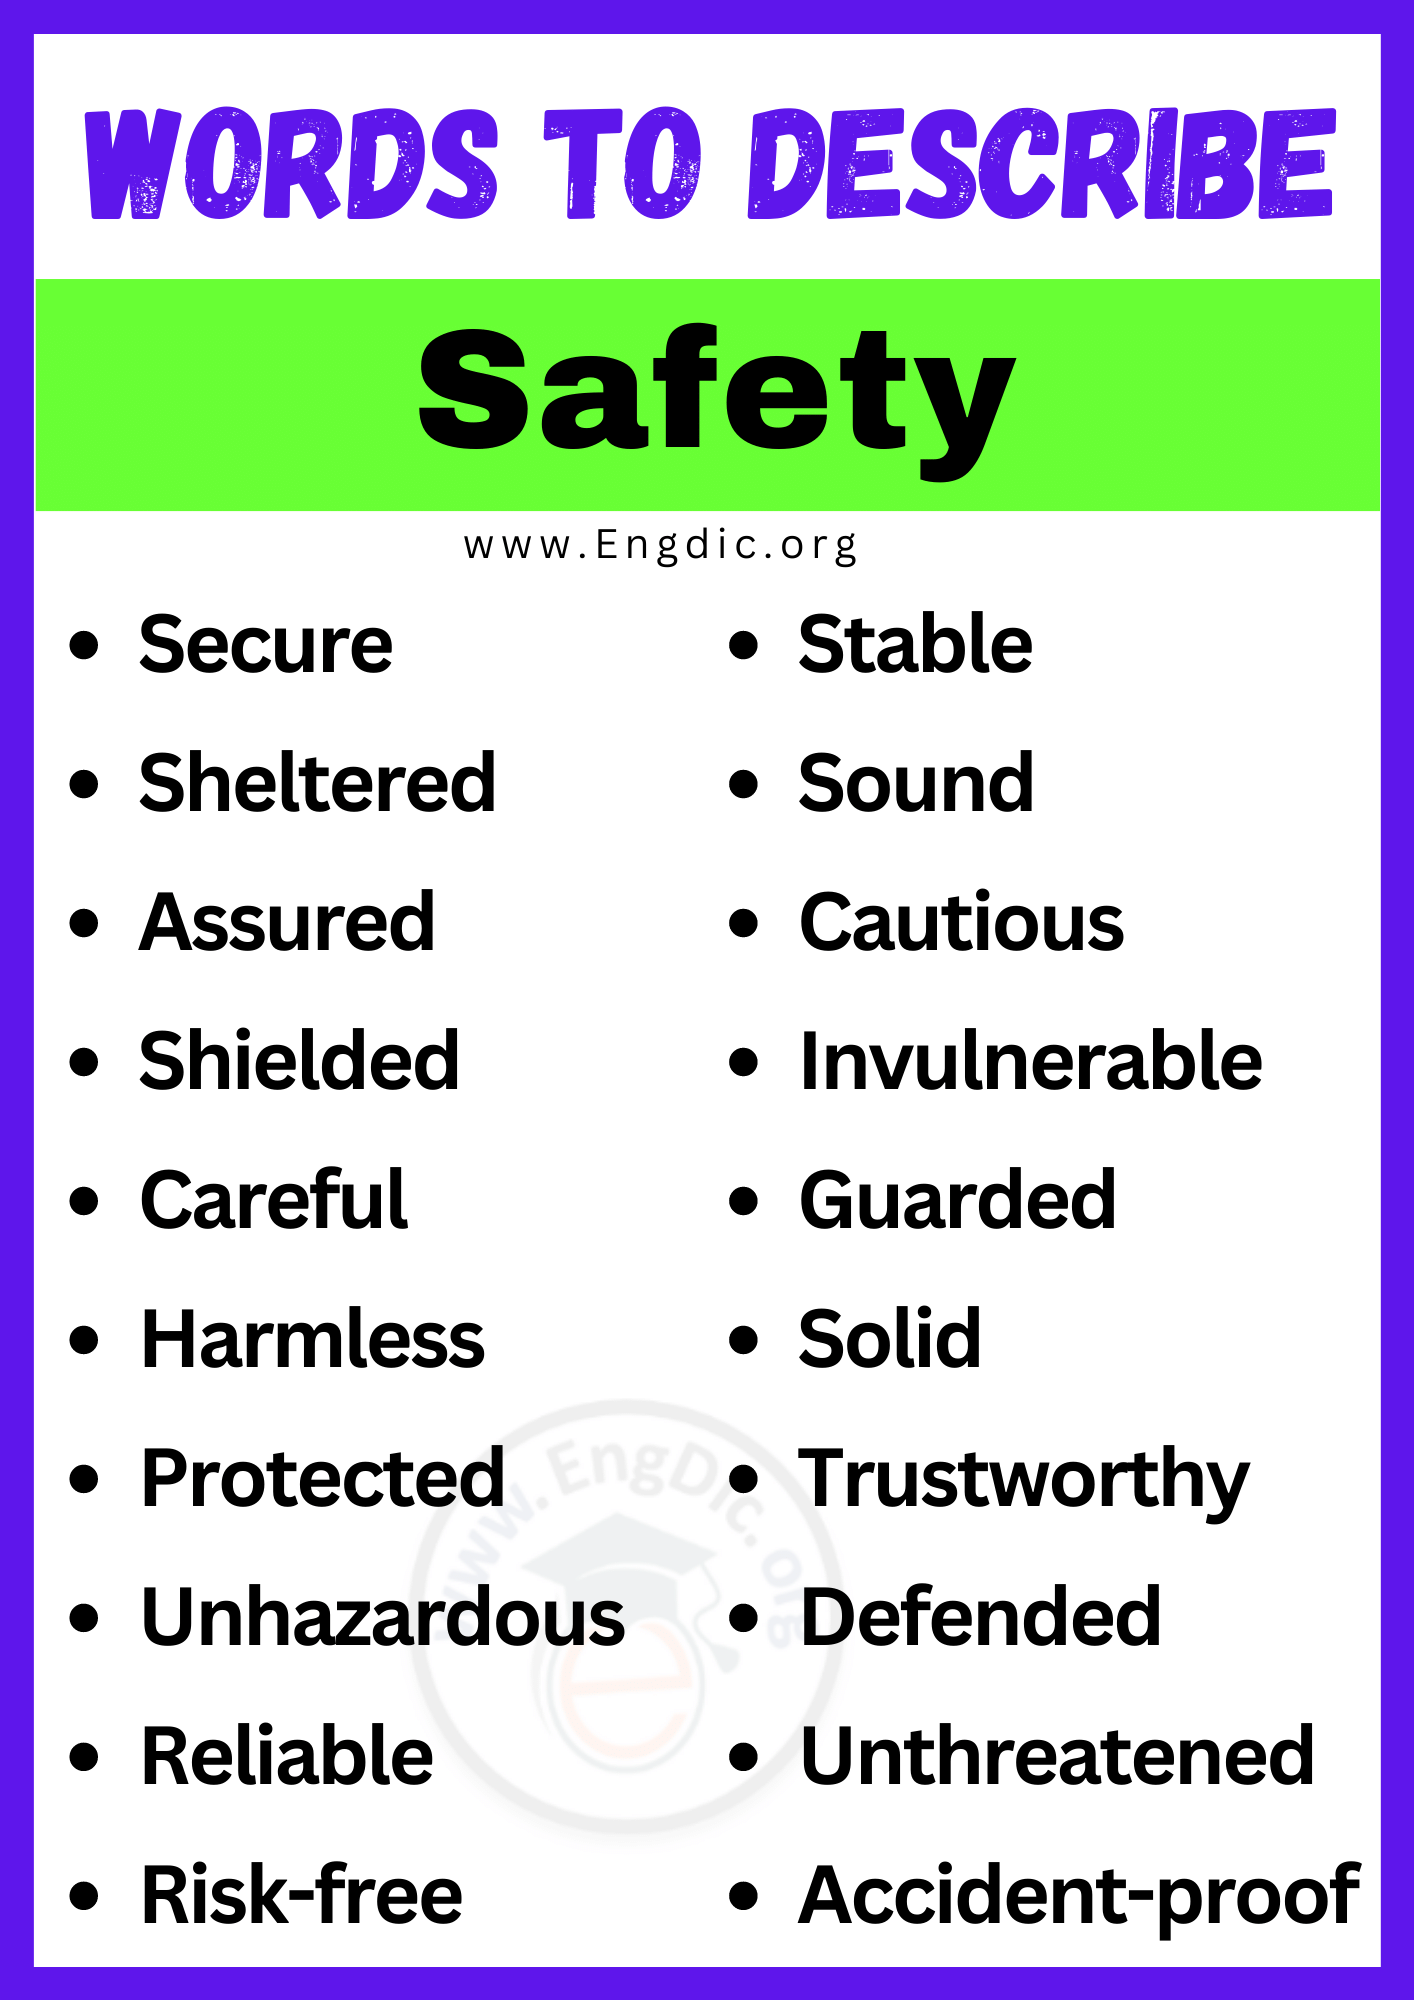 Words to Describe Safety